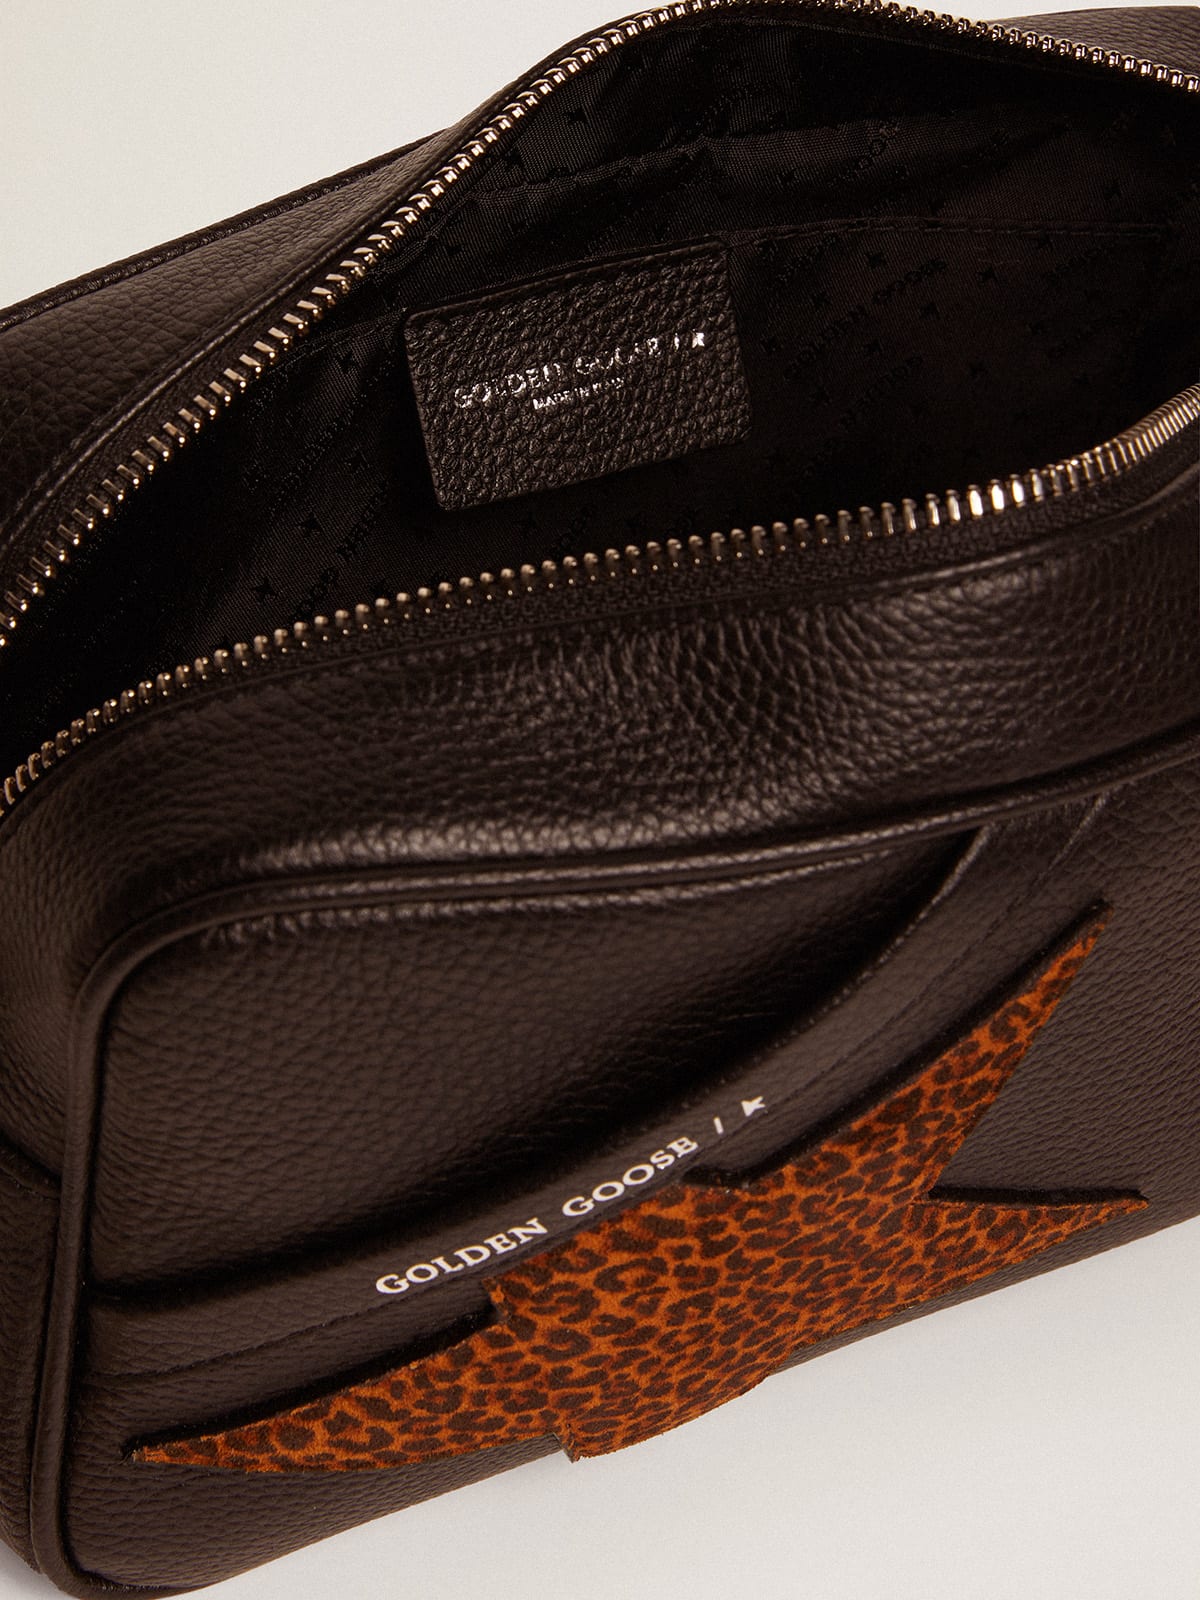 Golden Goose - Star Bag in dark brown leather with leopard-print suede star in 